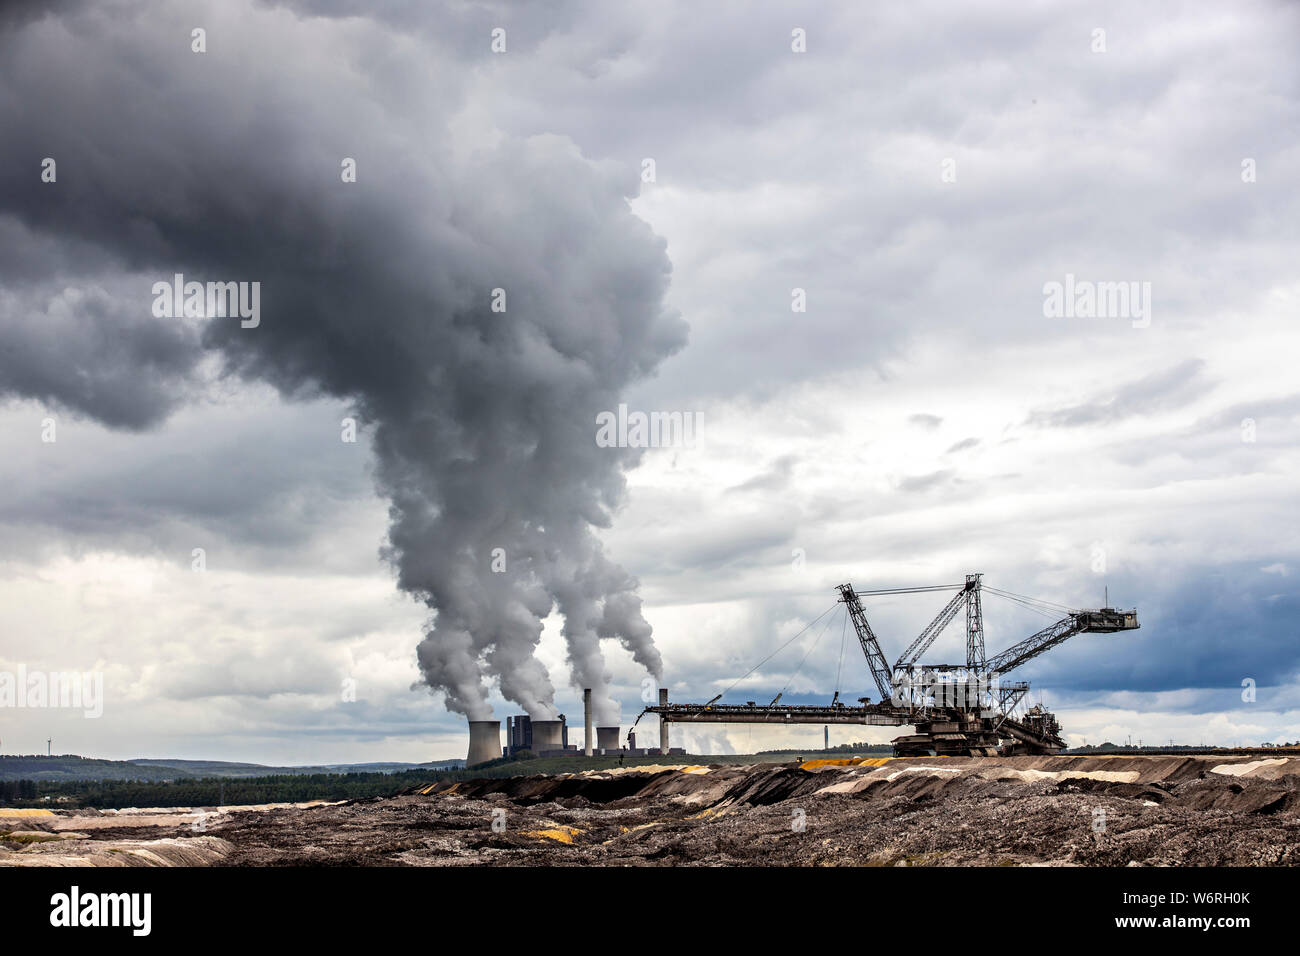 RWE Power Weisweiler lignite-fired power plant near Ecschweiler, at the Inden opencast lignite mine, large lignite-fired power plant with 4 units and Stock Photo